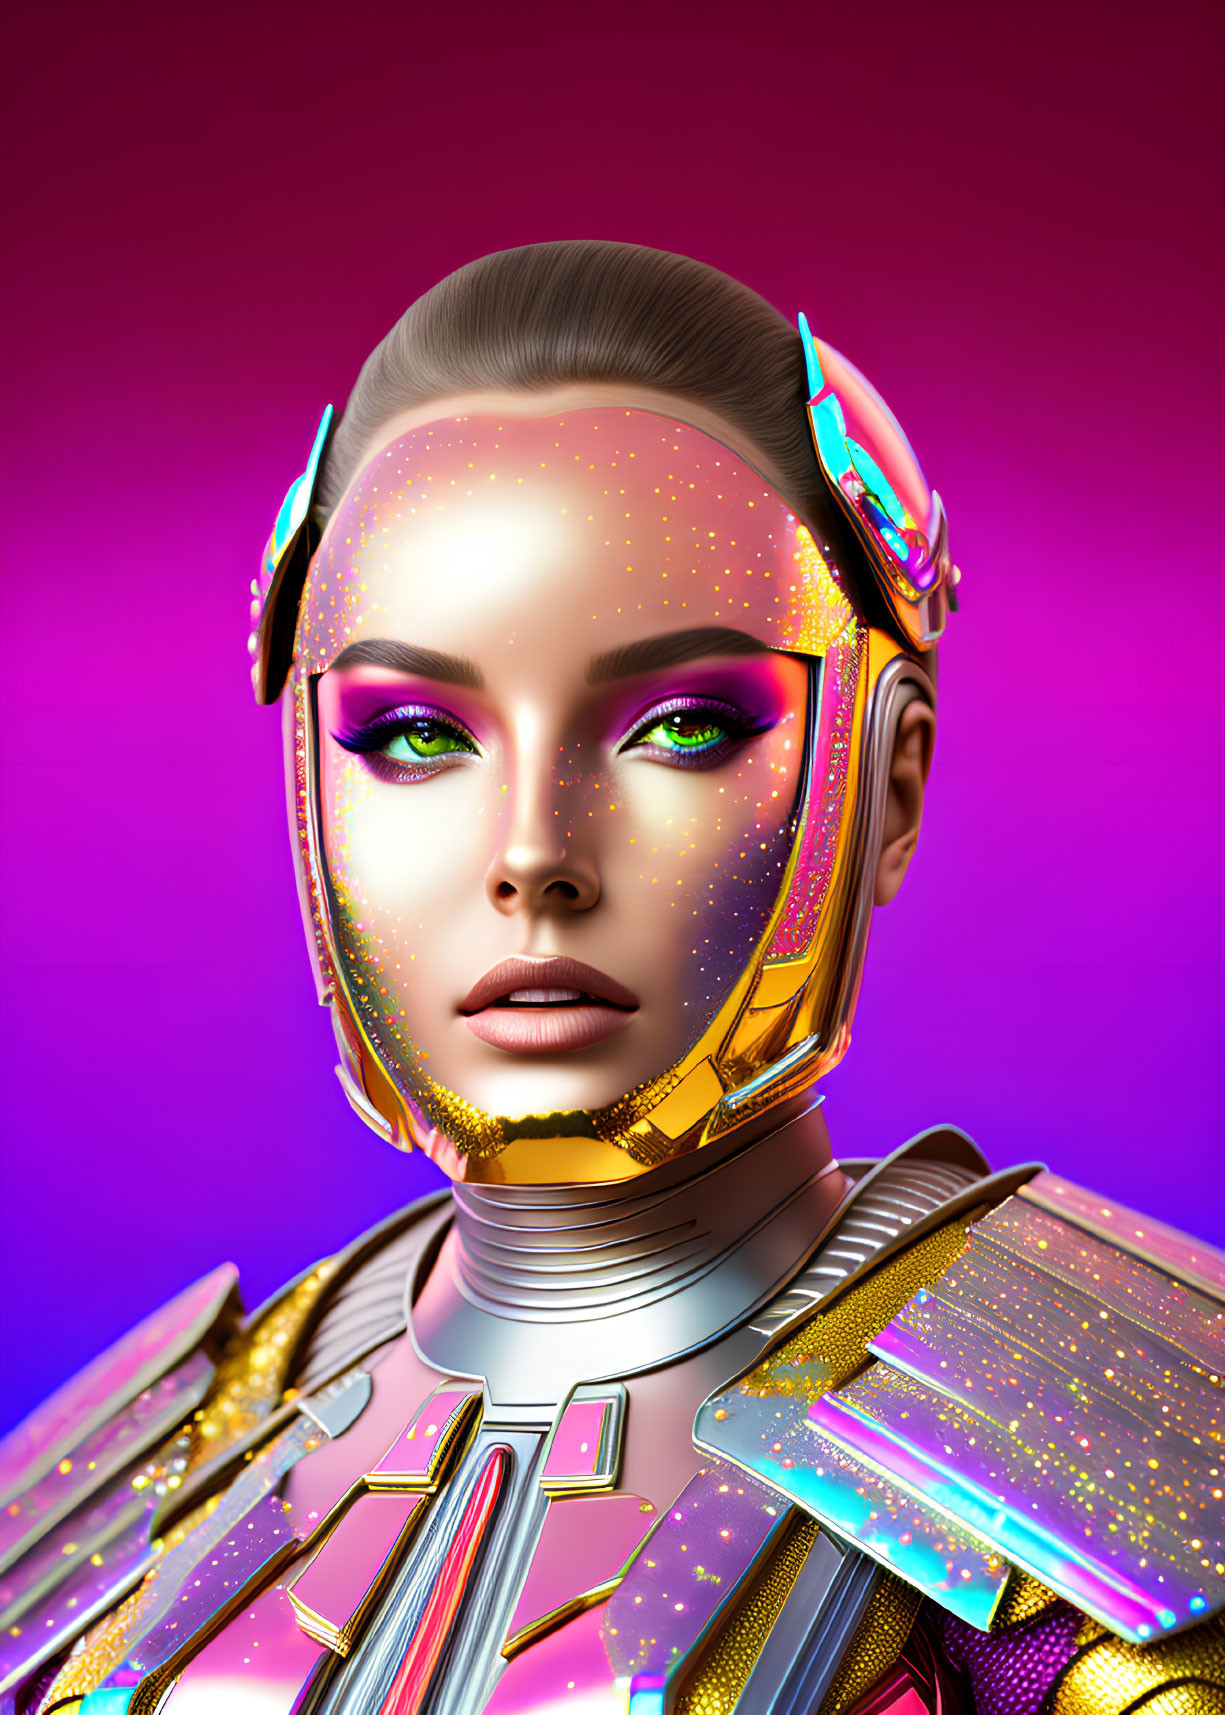 Futuristic female figure with glowing skin and vibrant eyeshadow